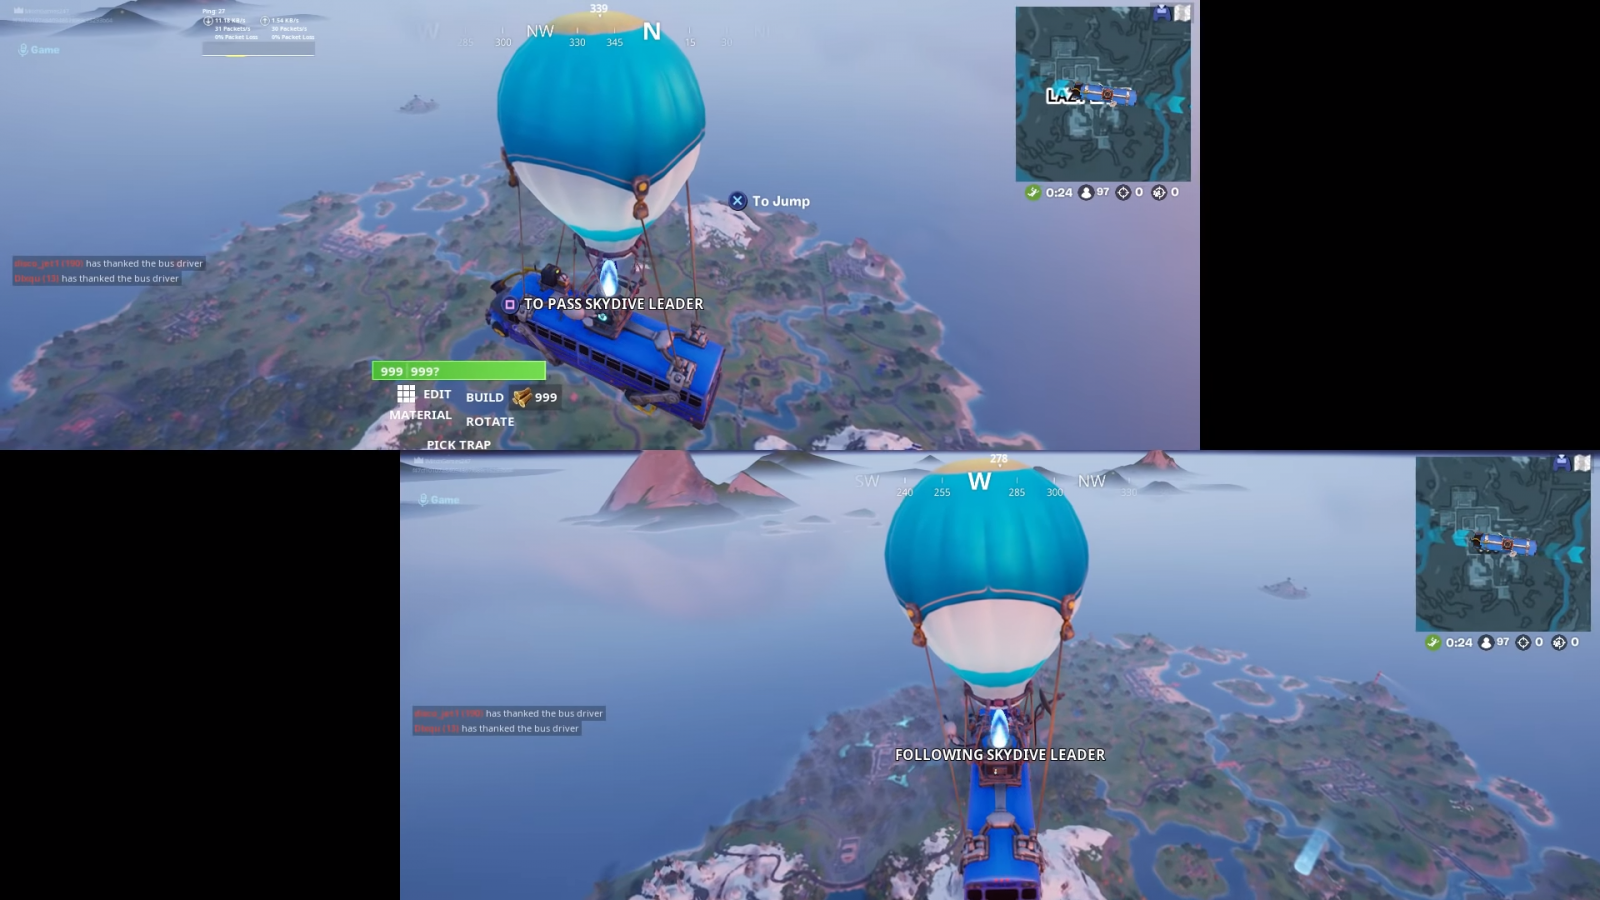 Can You Split Screen On Fortnite On Xbox Fortnite Split Screen Guide How To Use On Ps4 Xbox